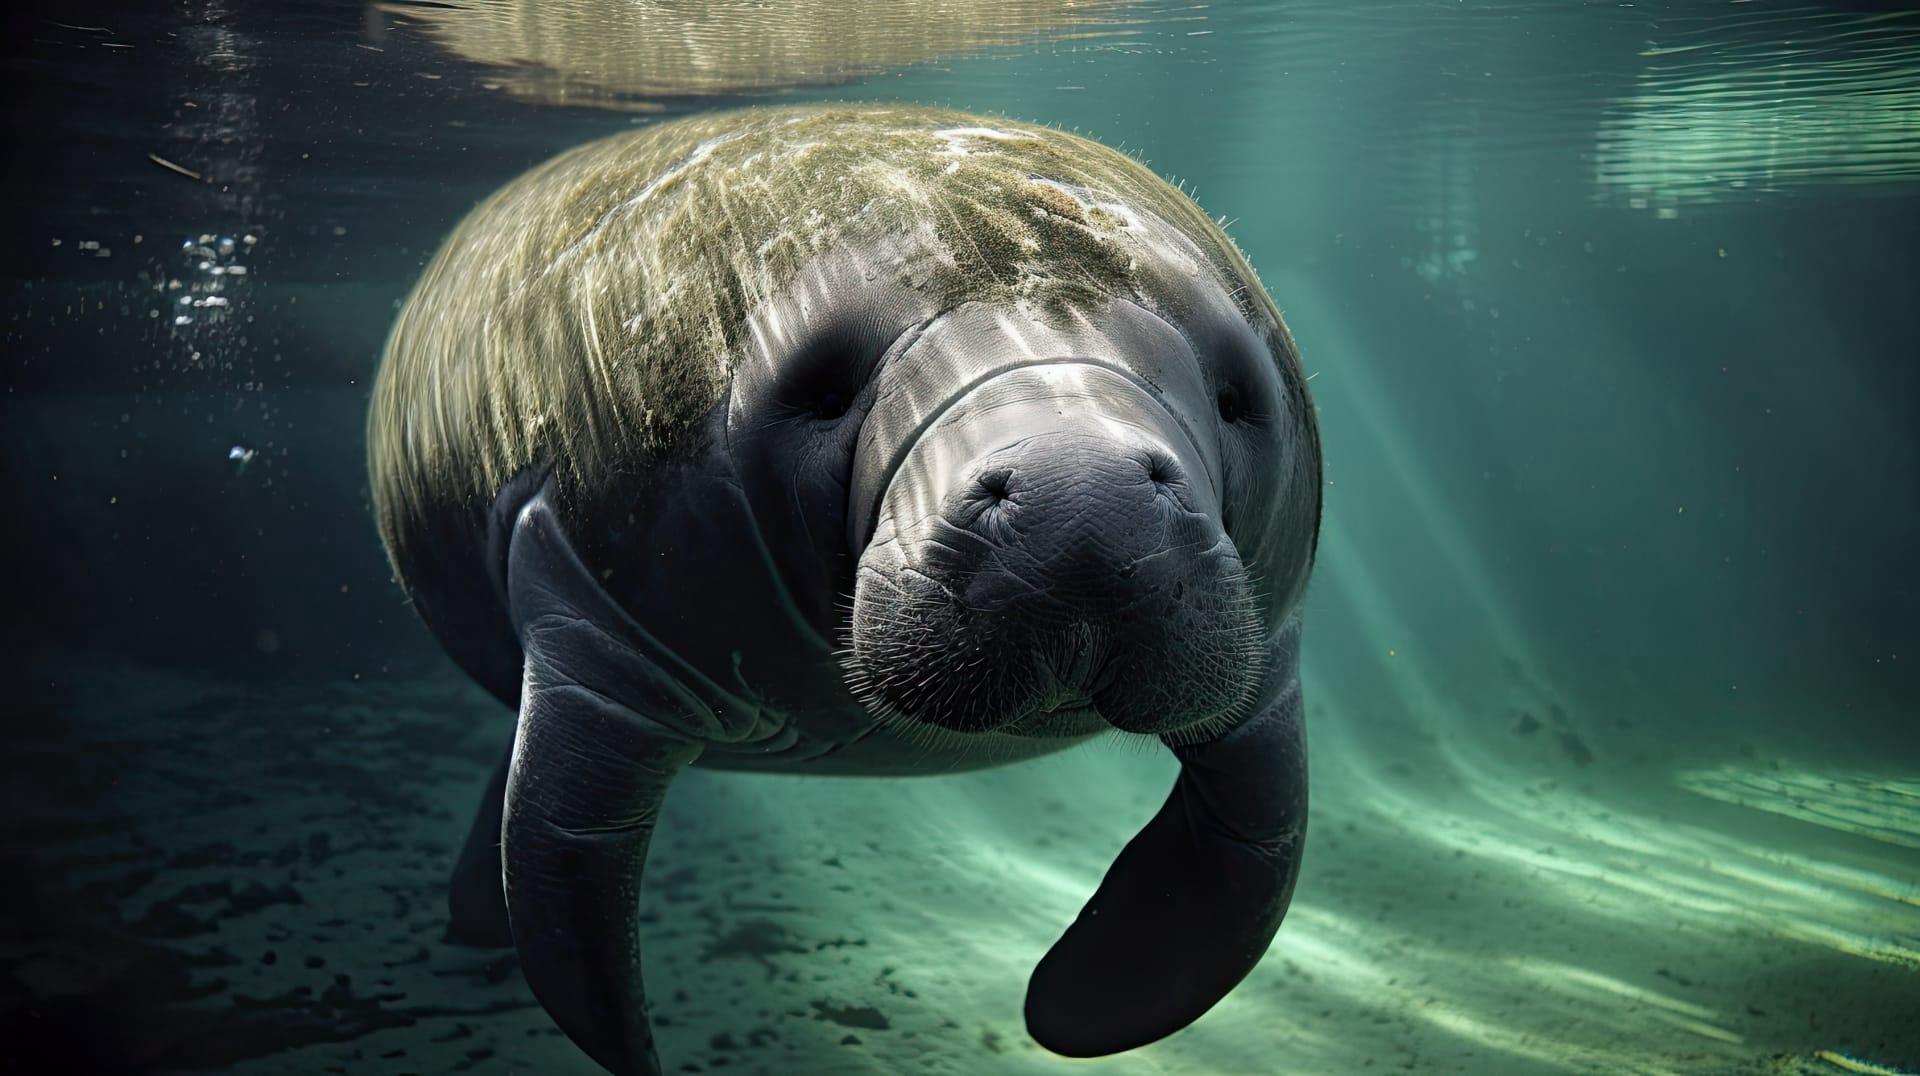 Manatee pictures